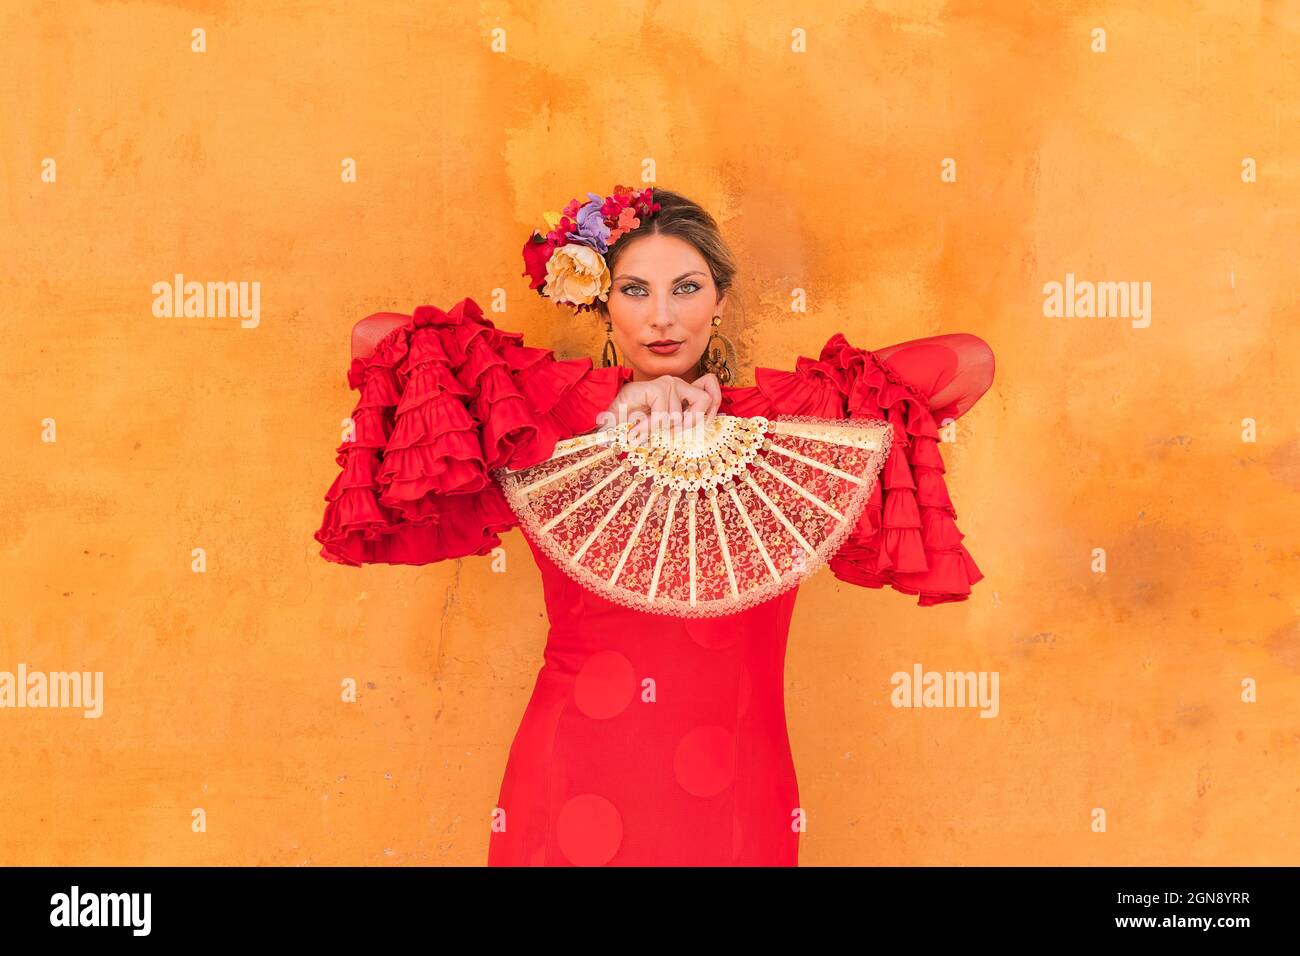 Female flamenco artist holding hand fan while standing in front of orange wall Stock Photo